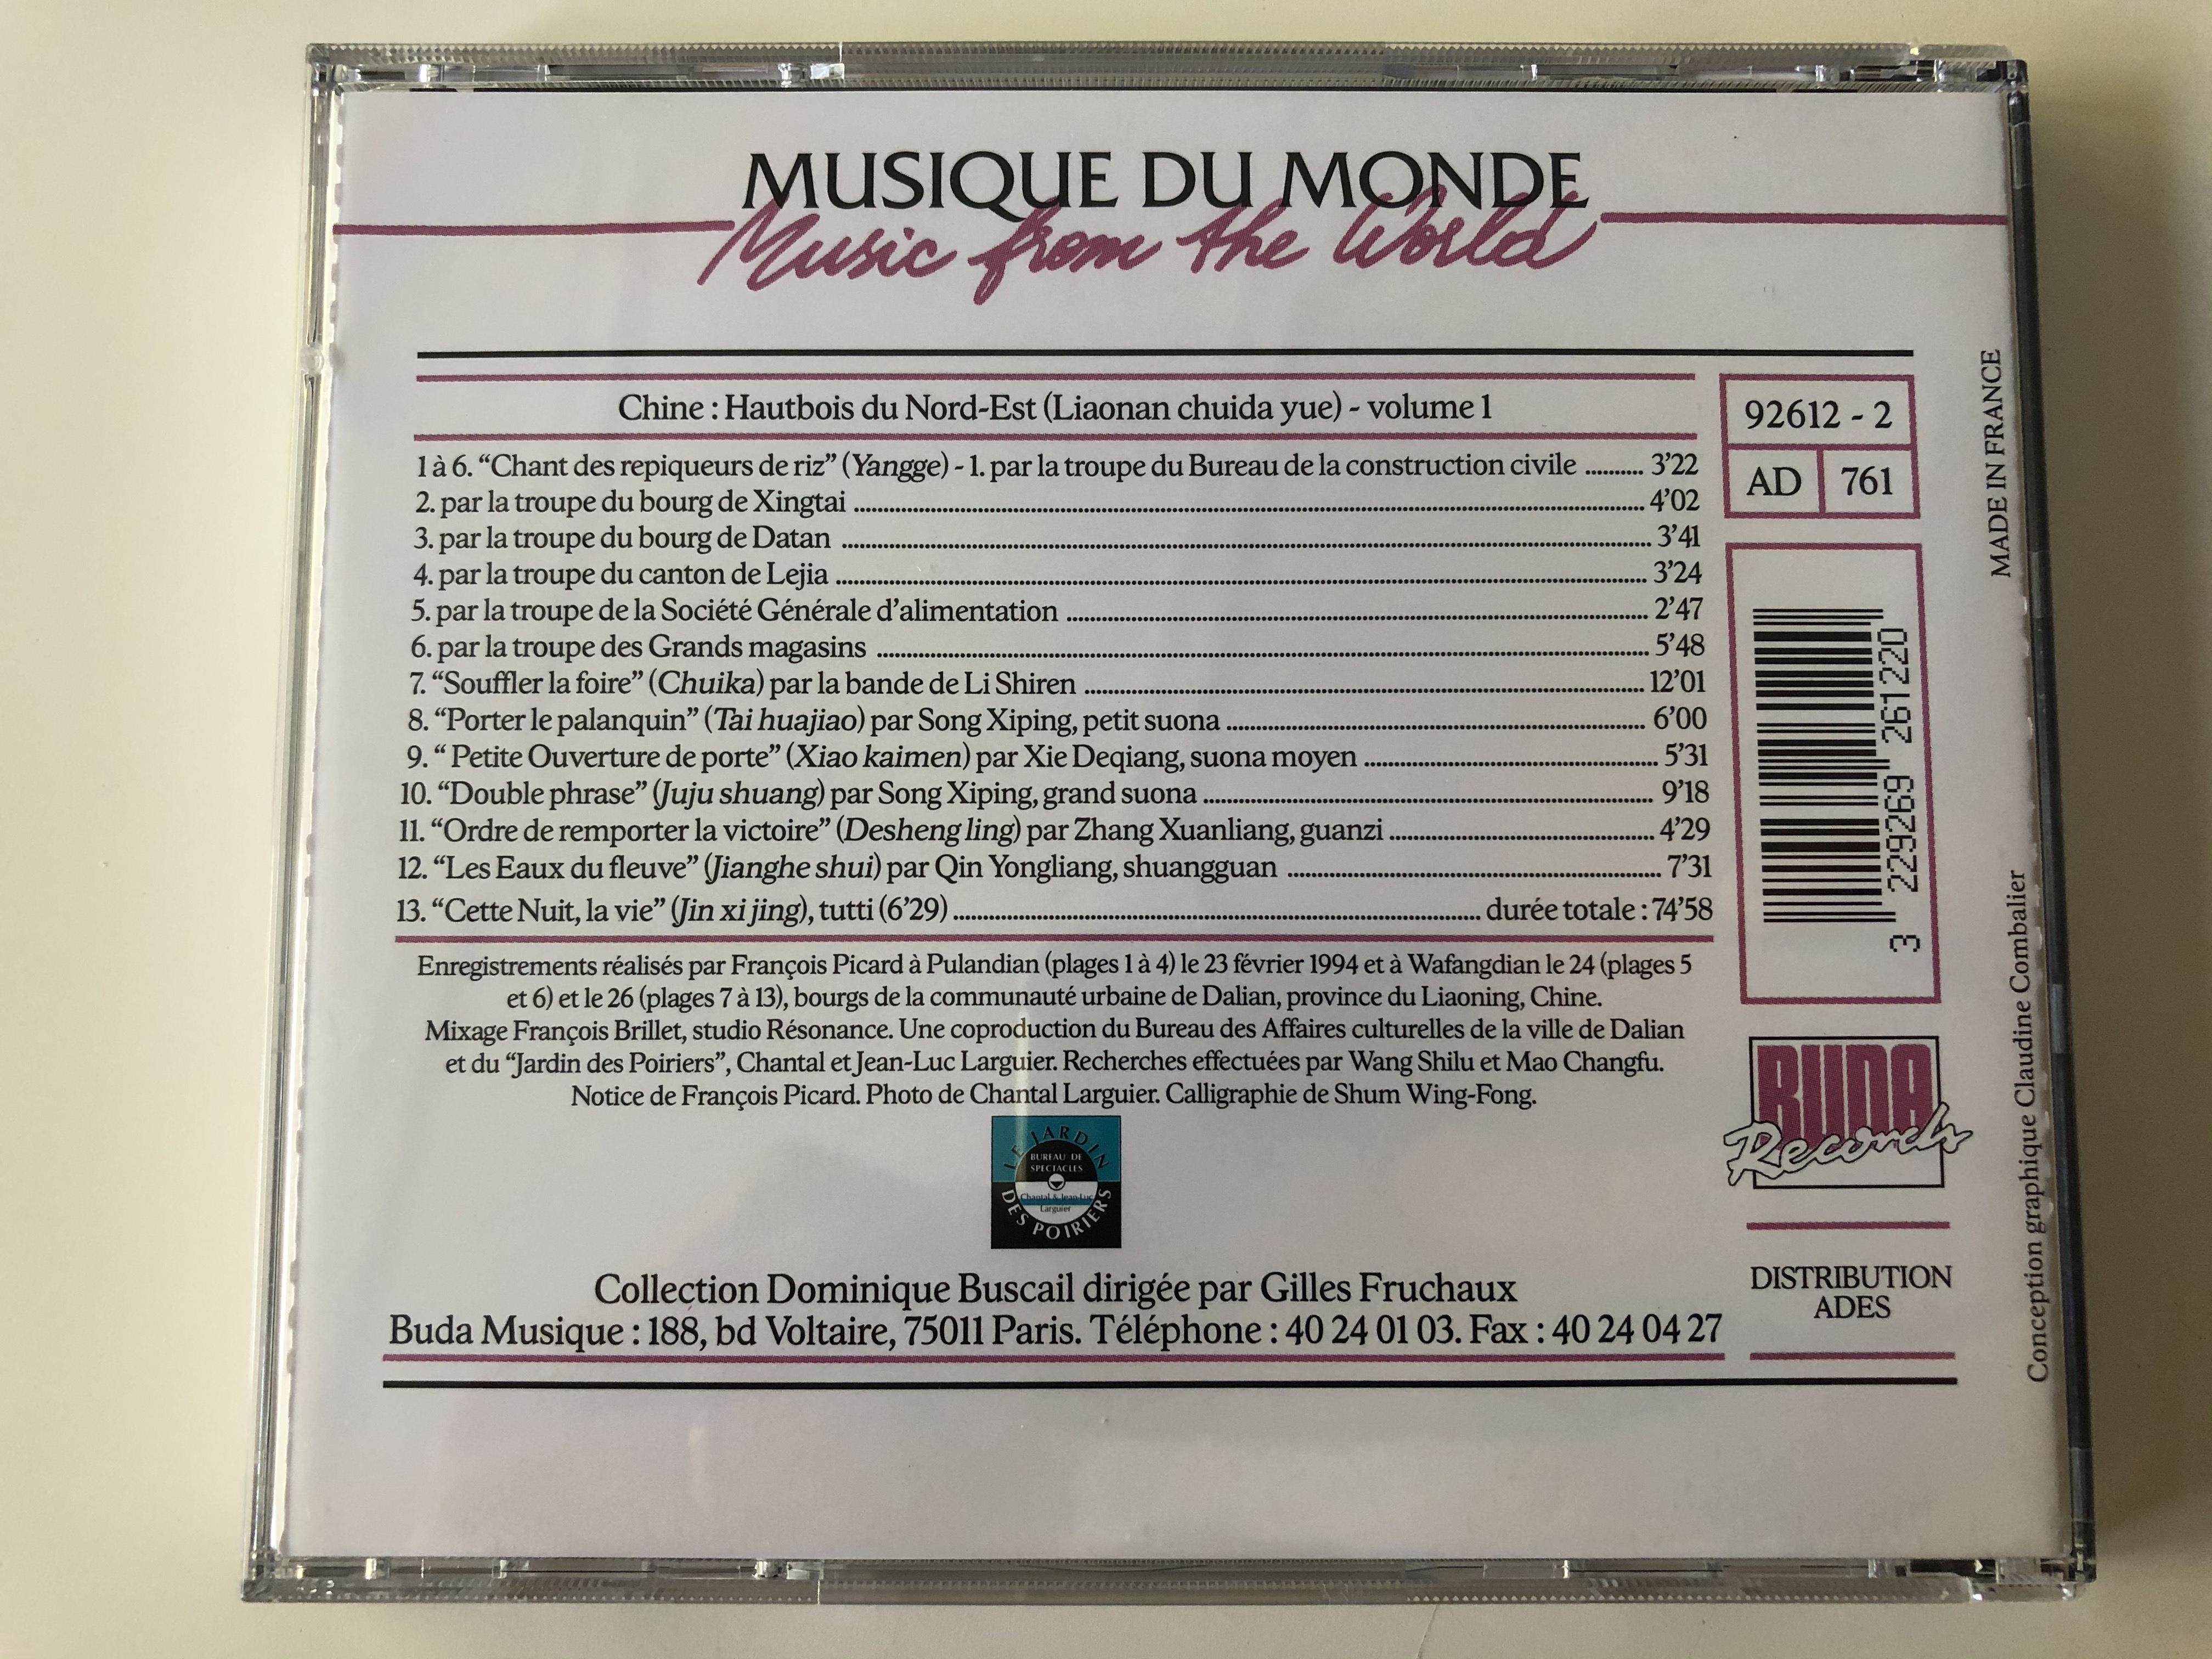 musique-du-monde-music-from-the-world-chine-hautbois-du-nord-est-shawms-from-north-east-china-volume-1-chine-musiques-de-la-premiere-lune-music-of-the-first-moon-buda-records-audio-cd-12-.jpg